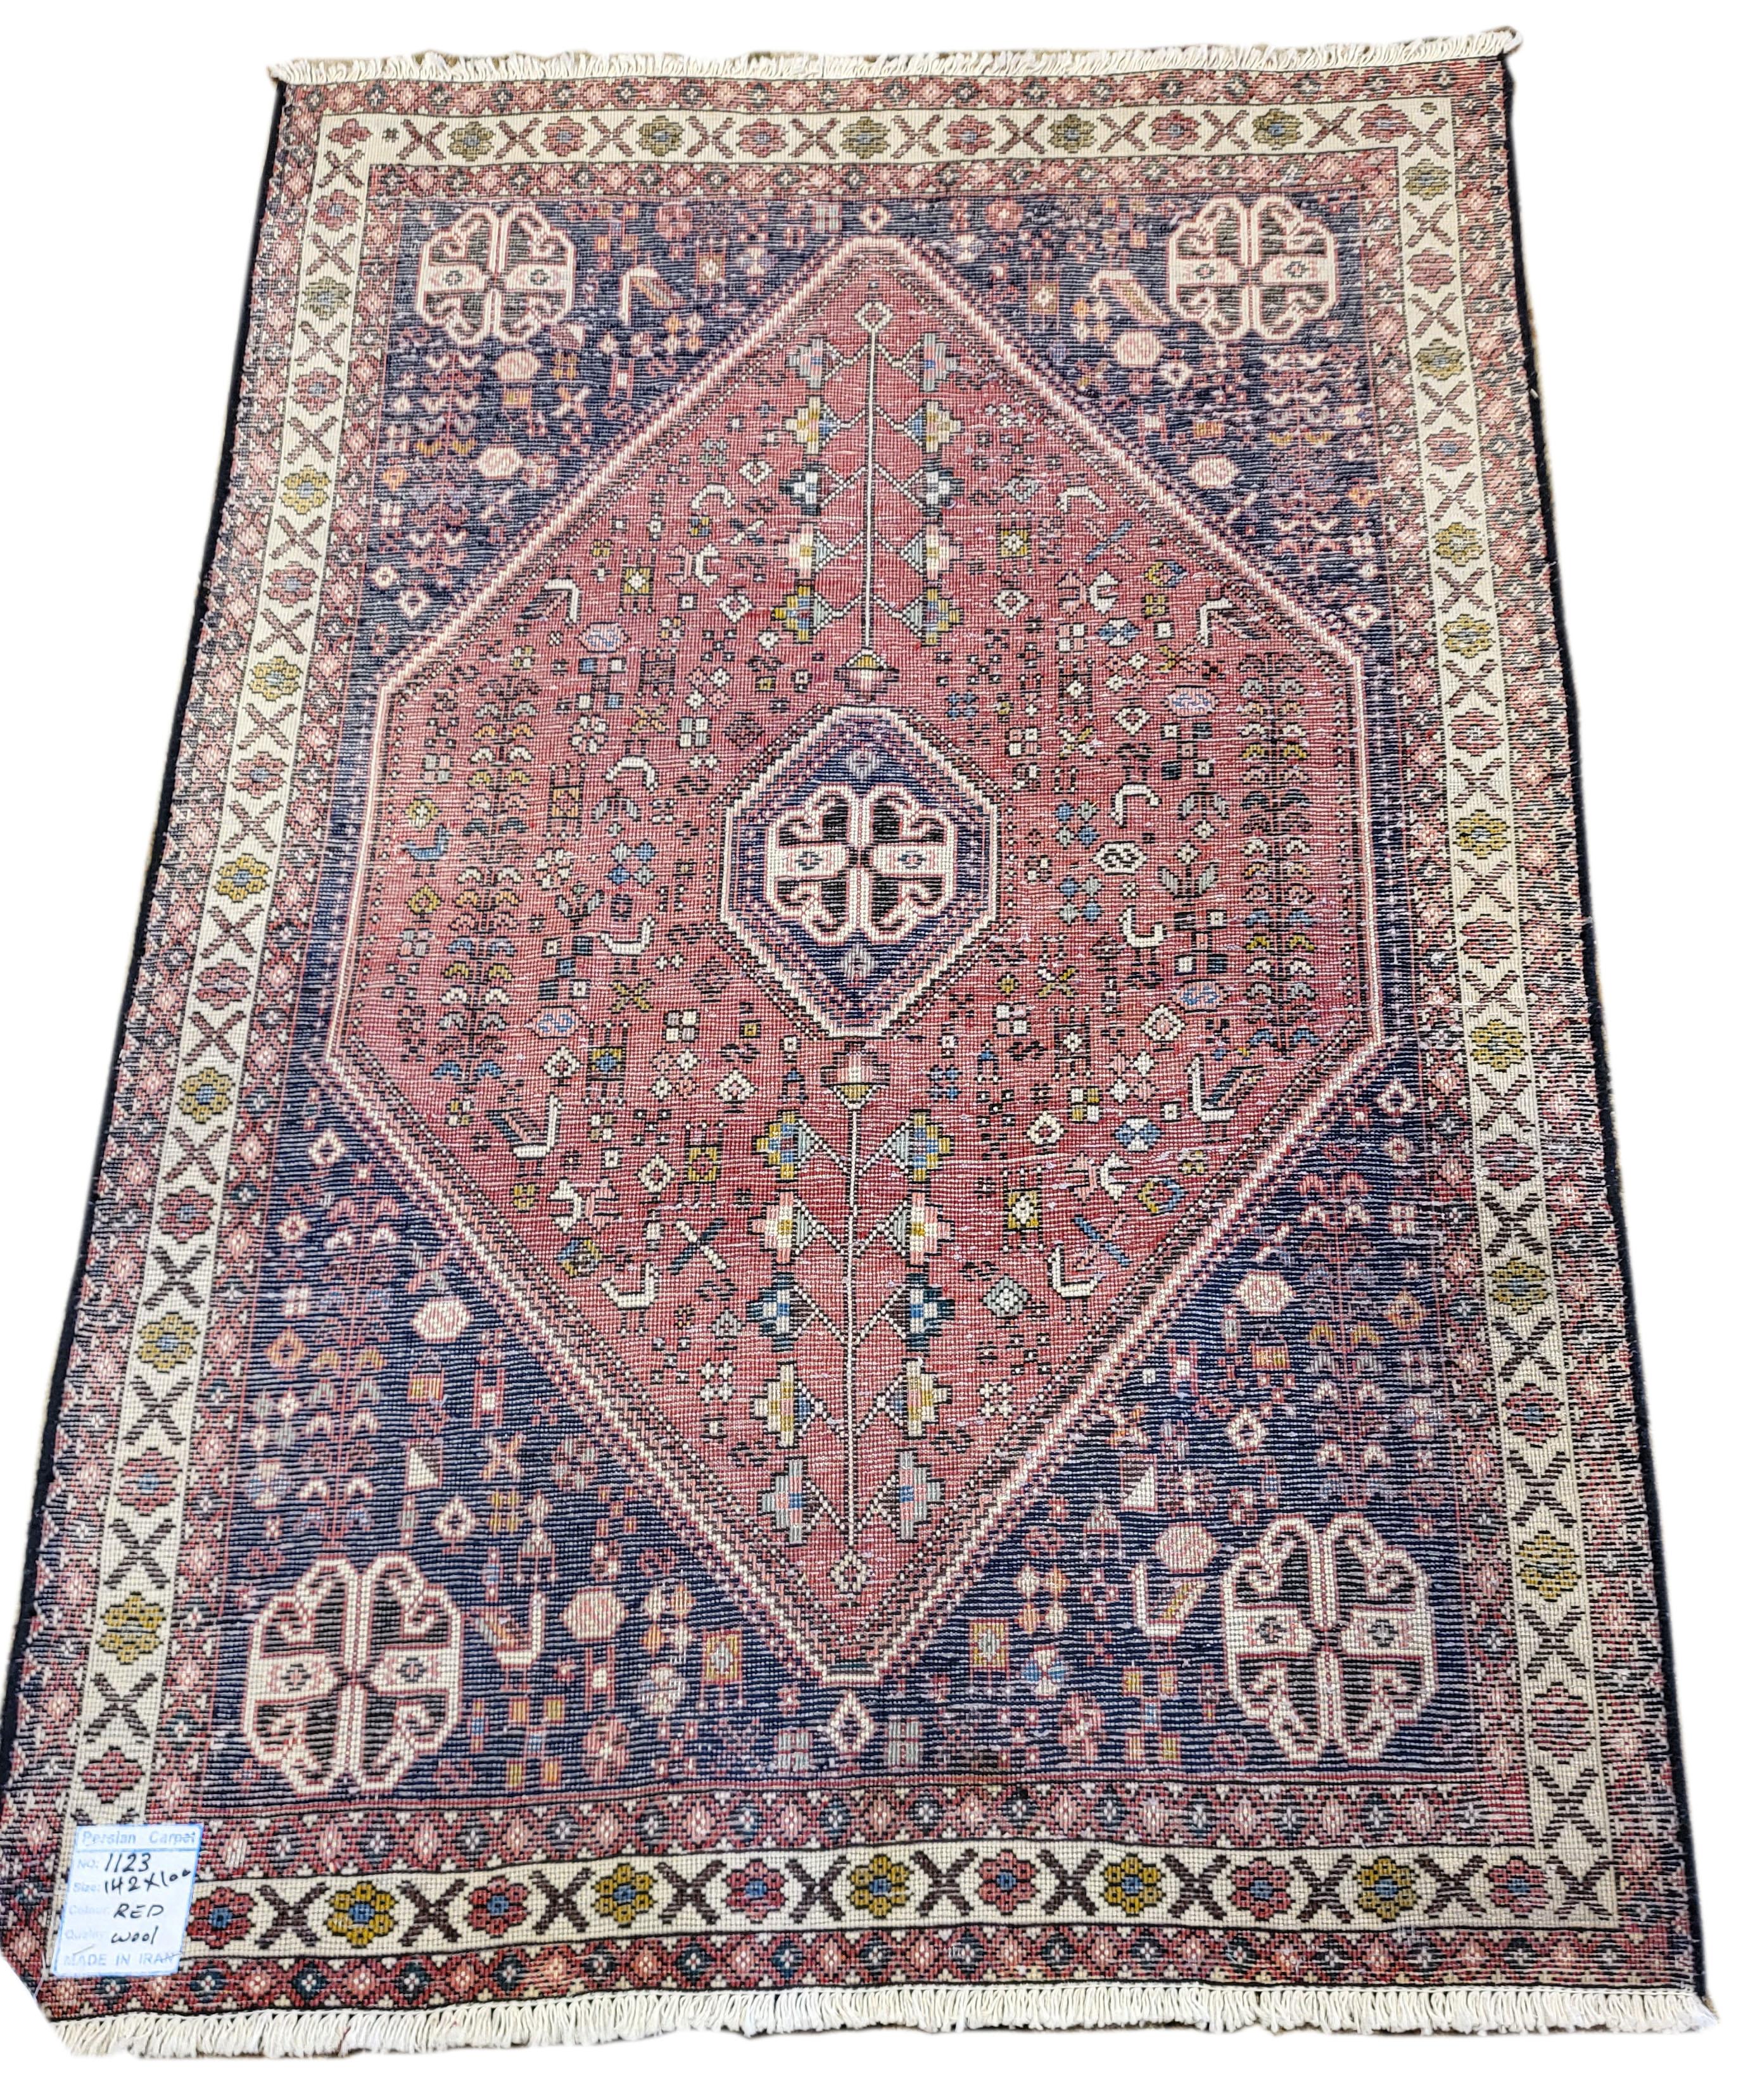 Impeccable 60's Persian Abadeh. This piece seems to be untouched by time and looks as good as it did when it was first woven in the 60's! This piece is incredibly rich in  motifs and is masterfully woven. Such a clean design and fine weave are the